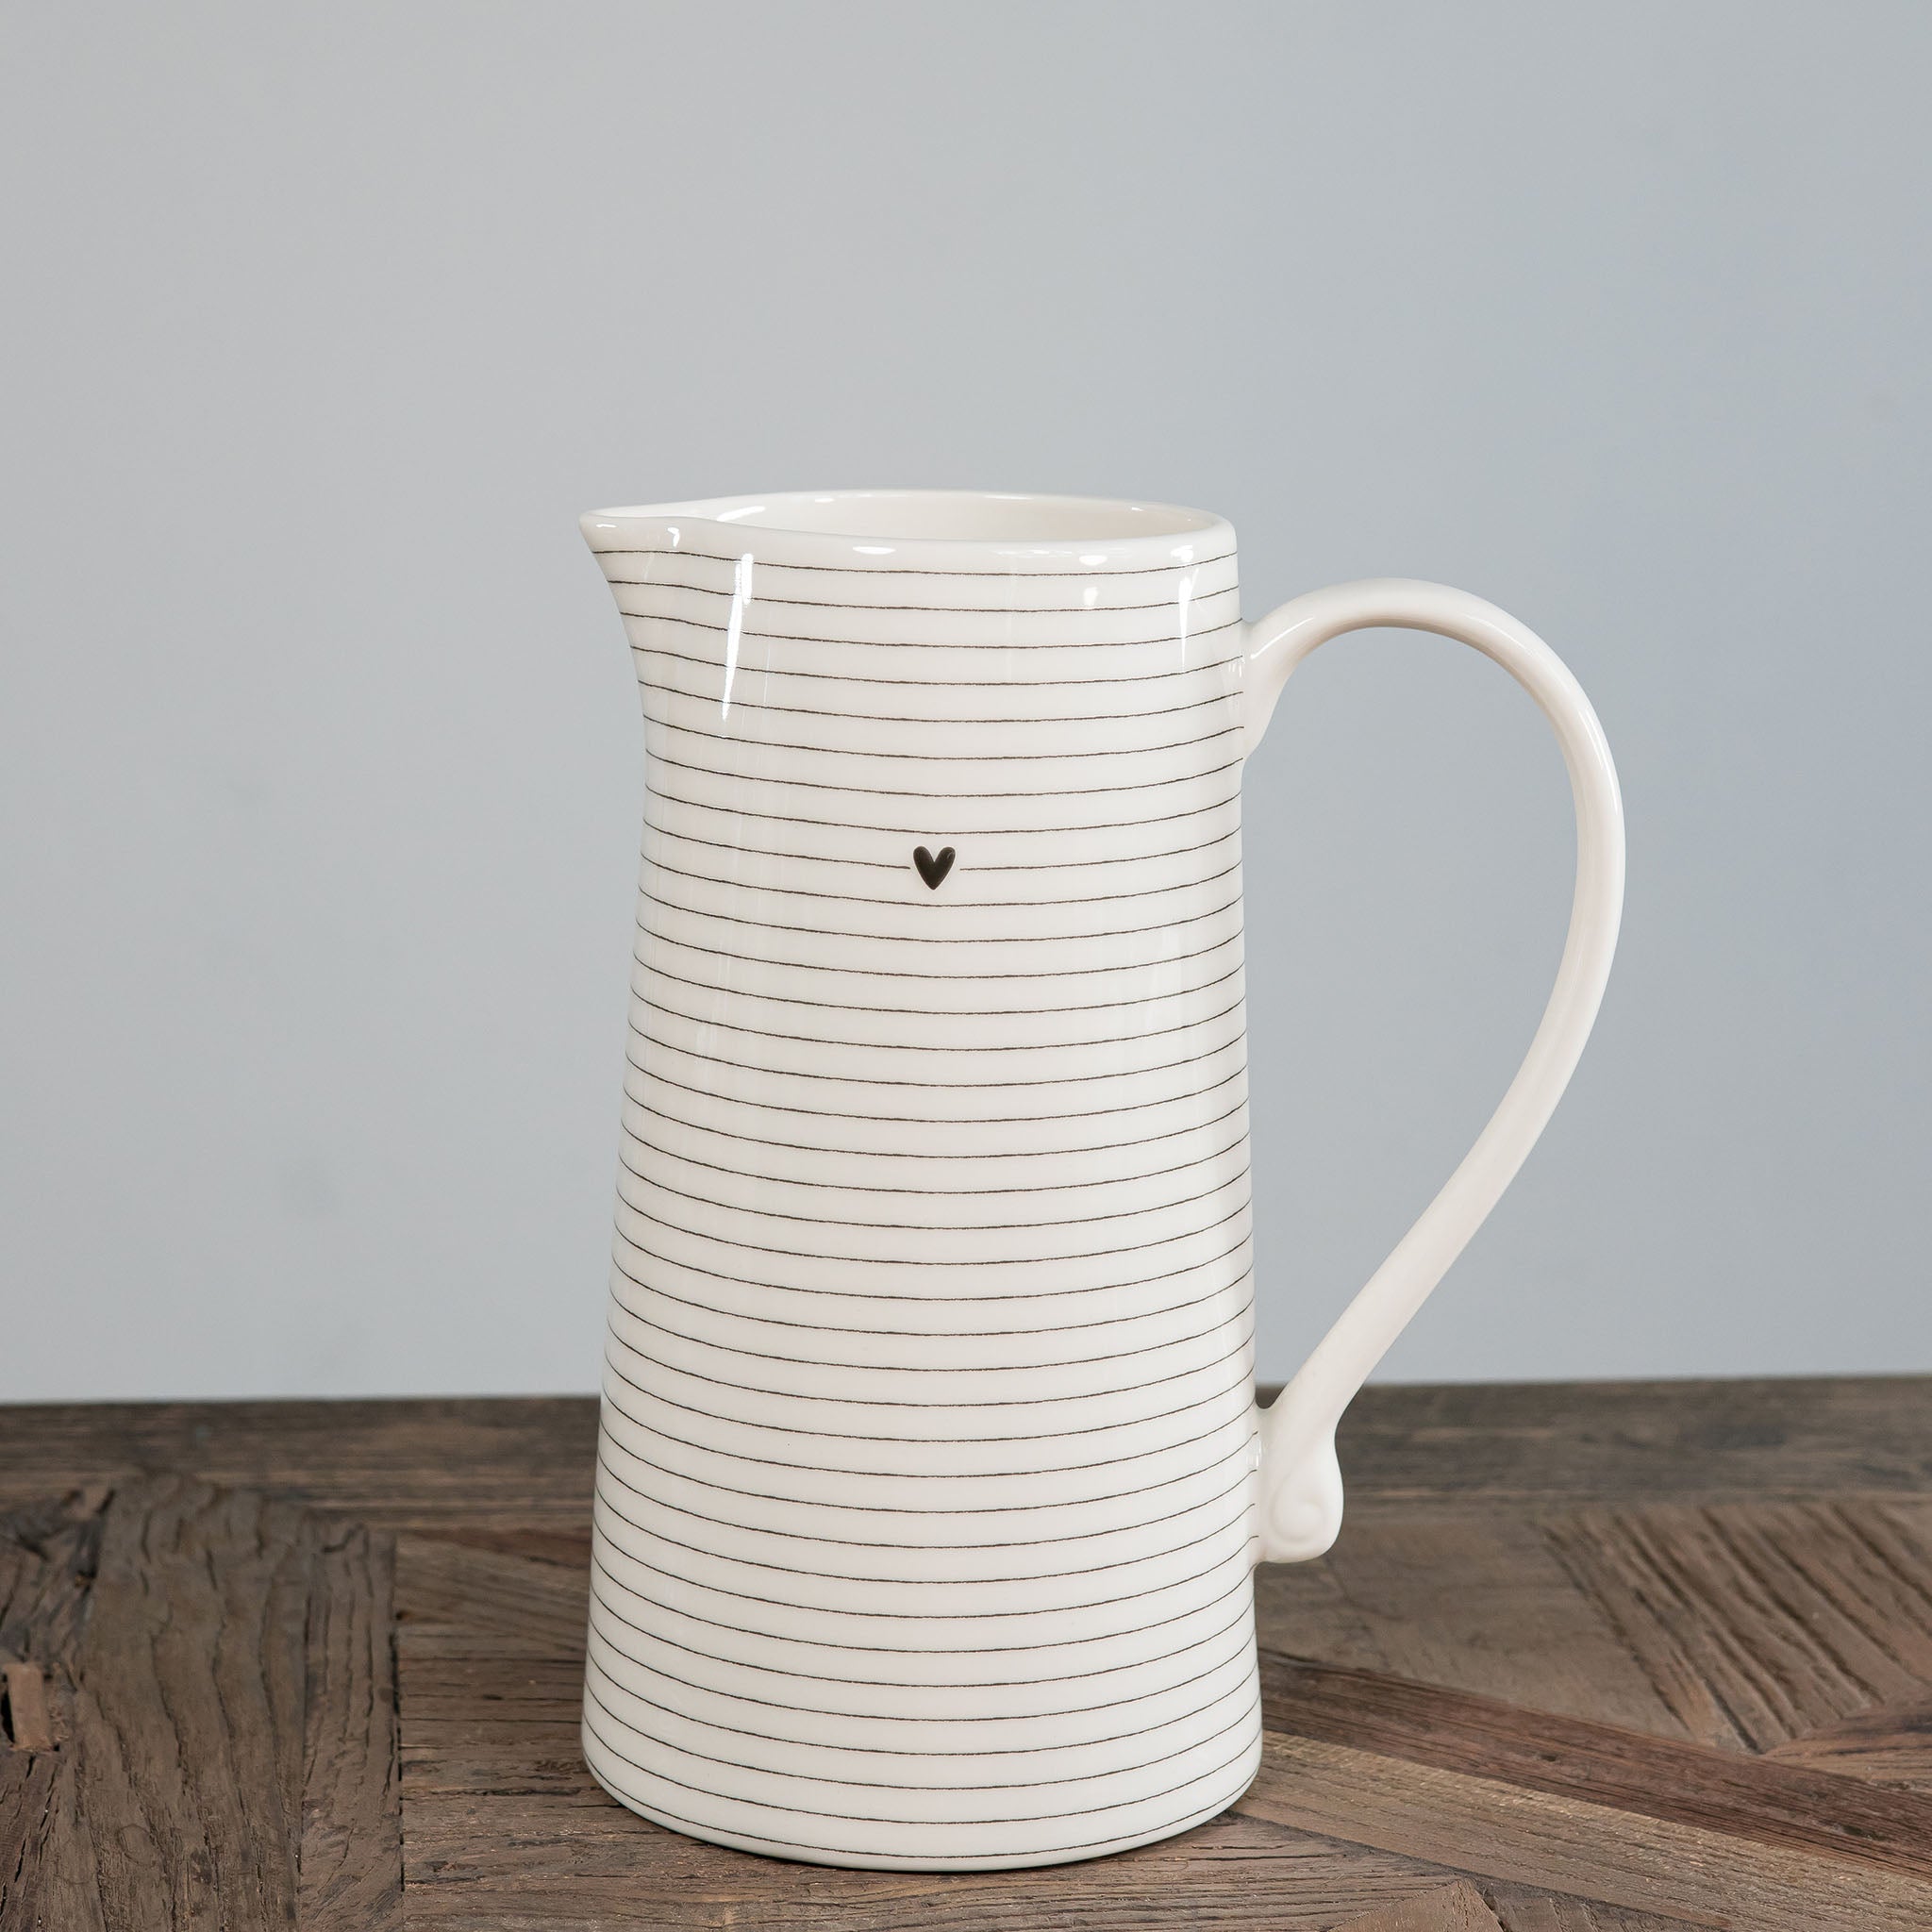 Big jug with heart and stripes